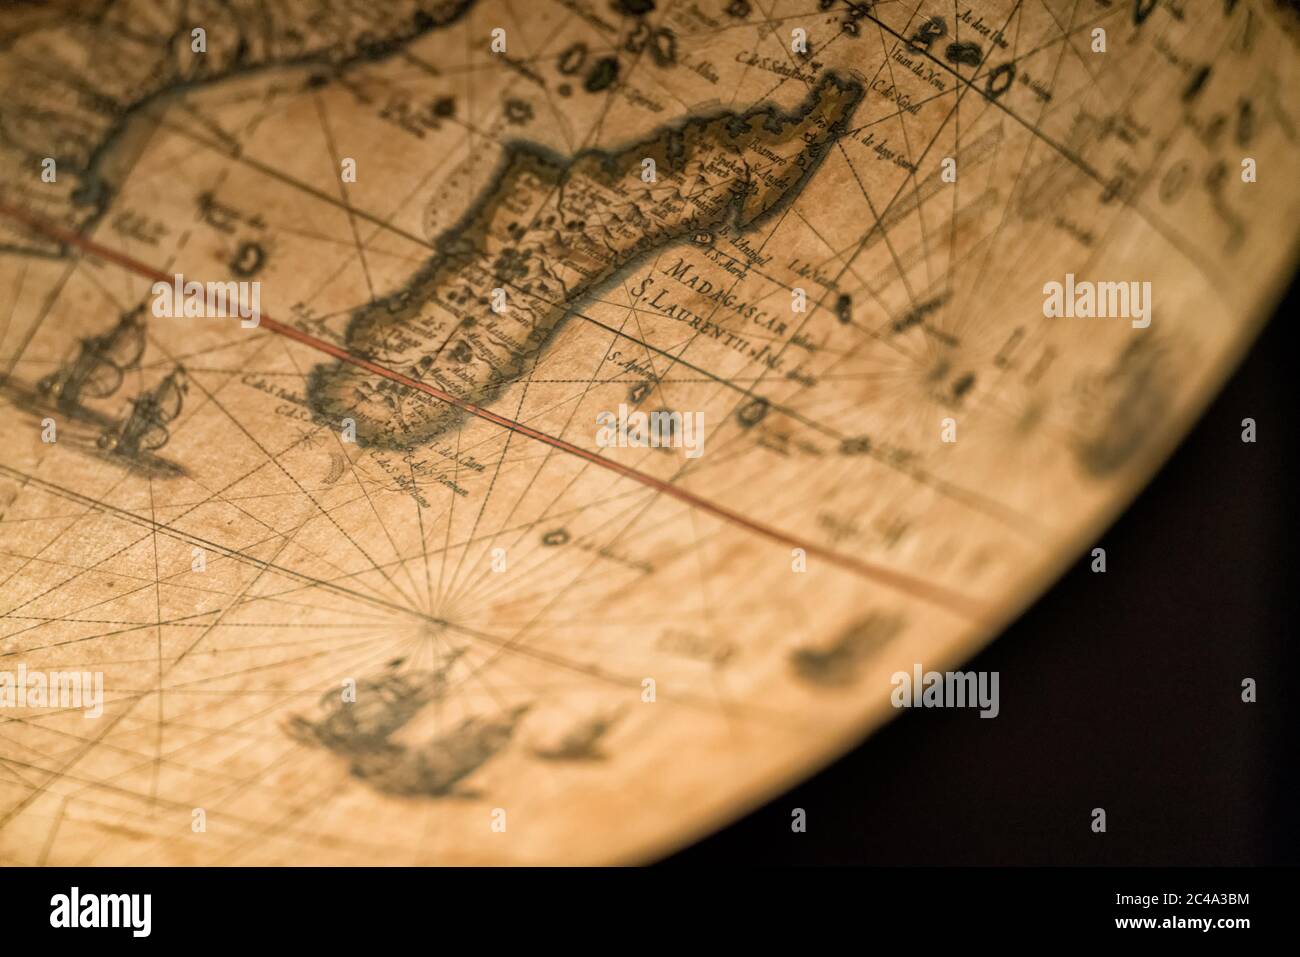 A beautiful old globe made in 17th century showing the islands of Madagascar, Reunion, Mayotte and Comoros. Parts of Mozambique are also shown. Stock Photo